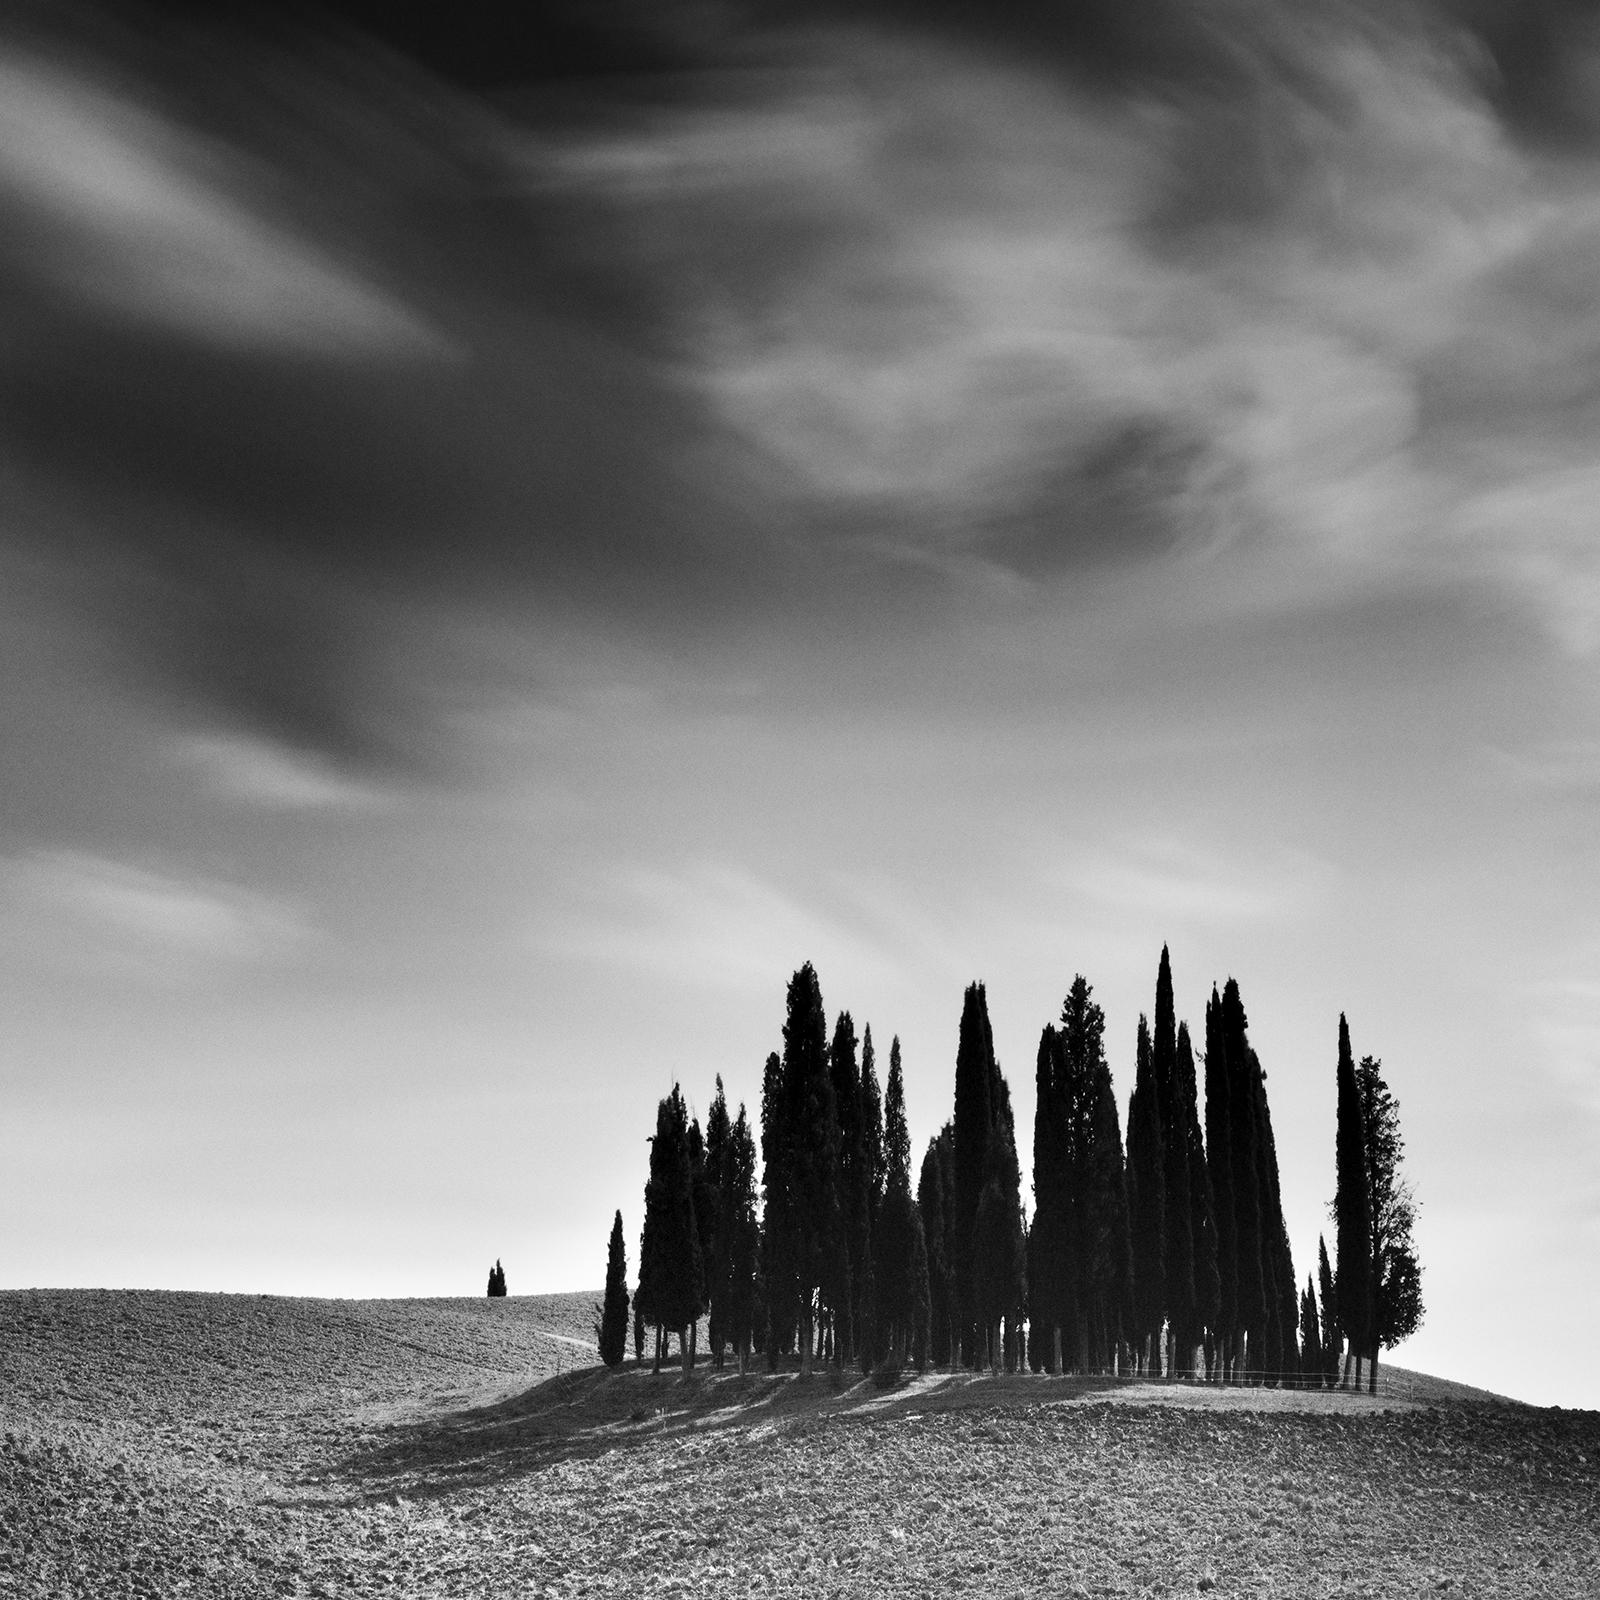 Black and white fine art long exposure panorama landscape photography. Cypress trees in a hilly landscape in the middle of Tuscany, Italy. Archival pigment ink print, edition of 9. Signed, titled, dated and numbered by artist. Certificate of